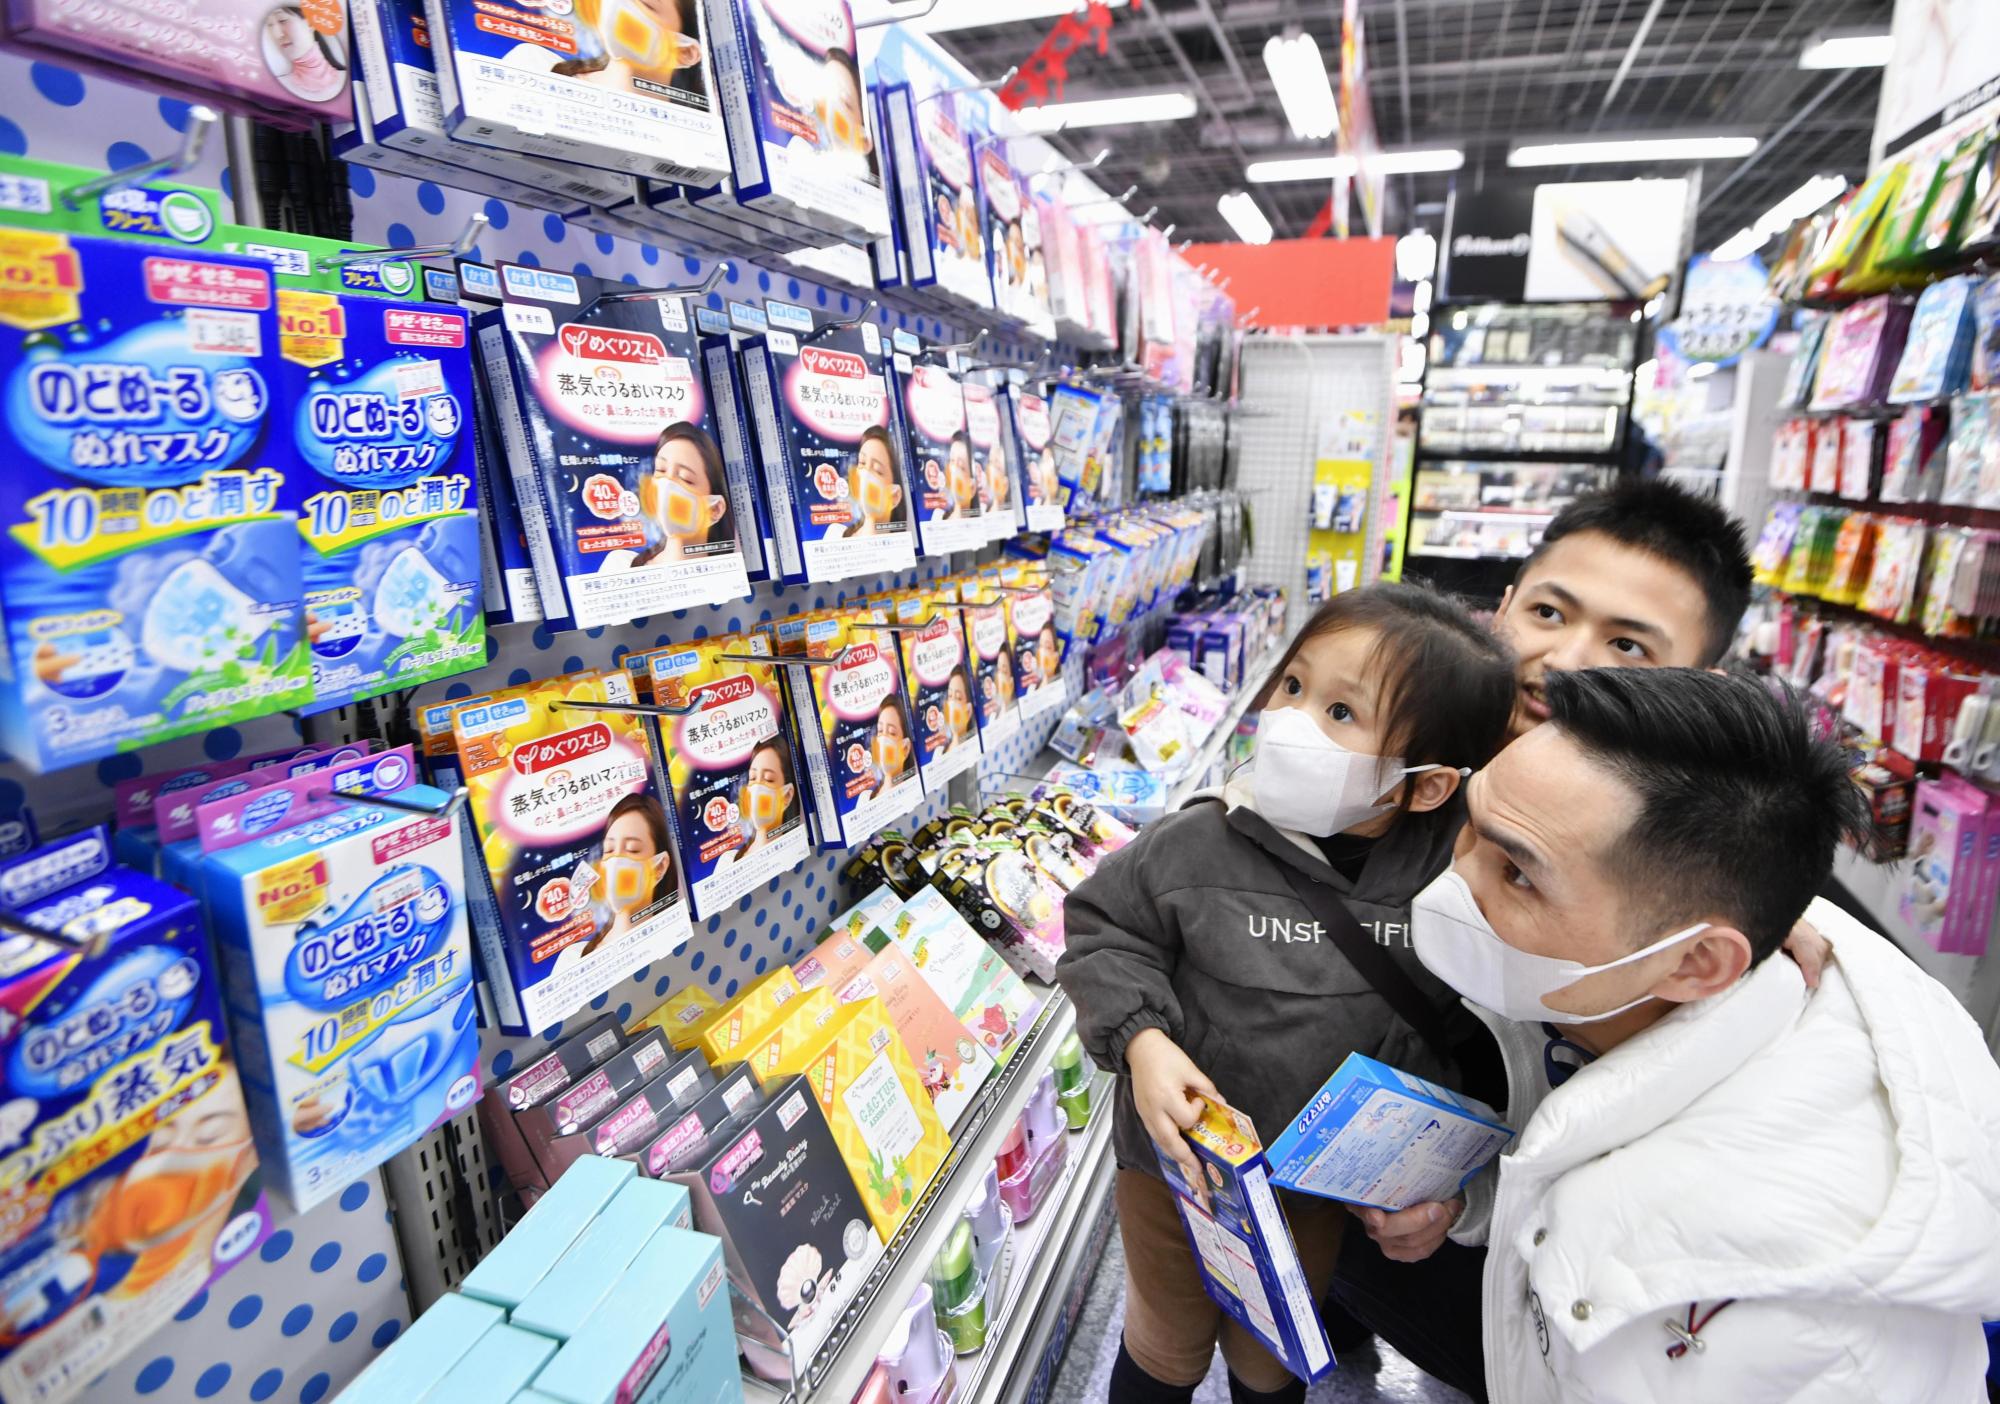 Pharmacies in Tokyo say that surgical masks are typically sold out by 10 a.m. amid growing fears over the coronavirus outbreak. | KYODO